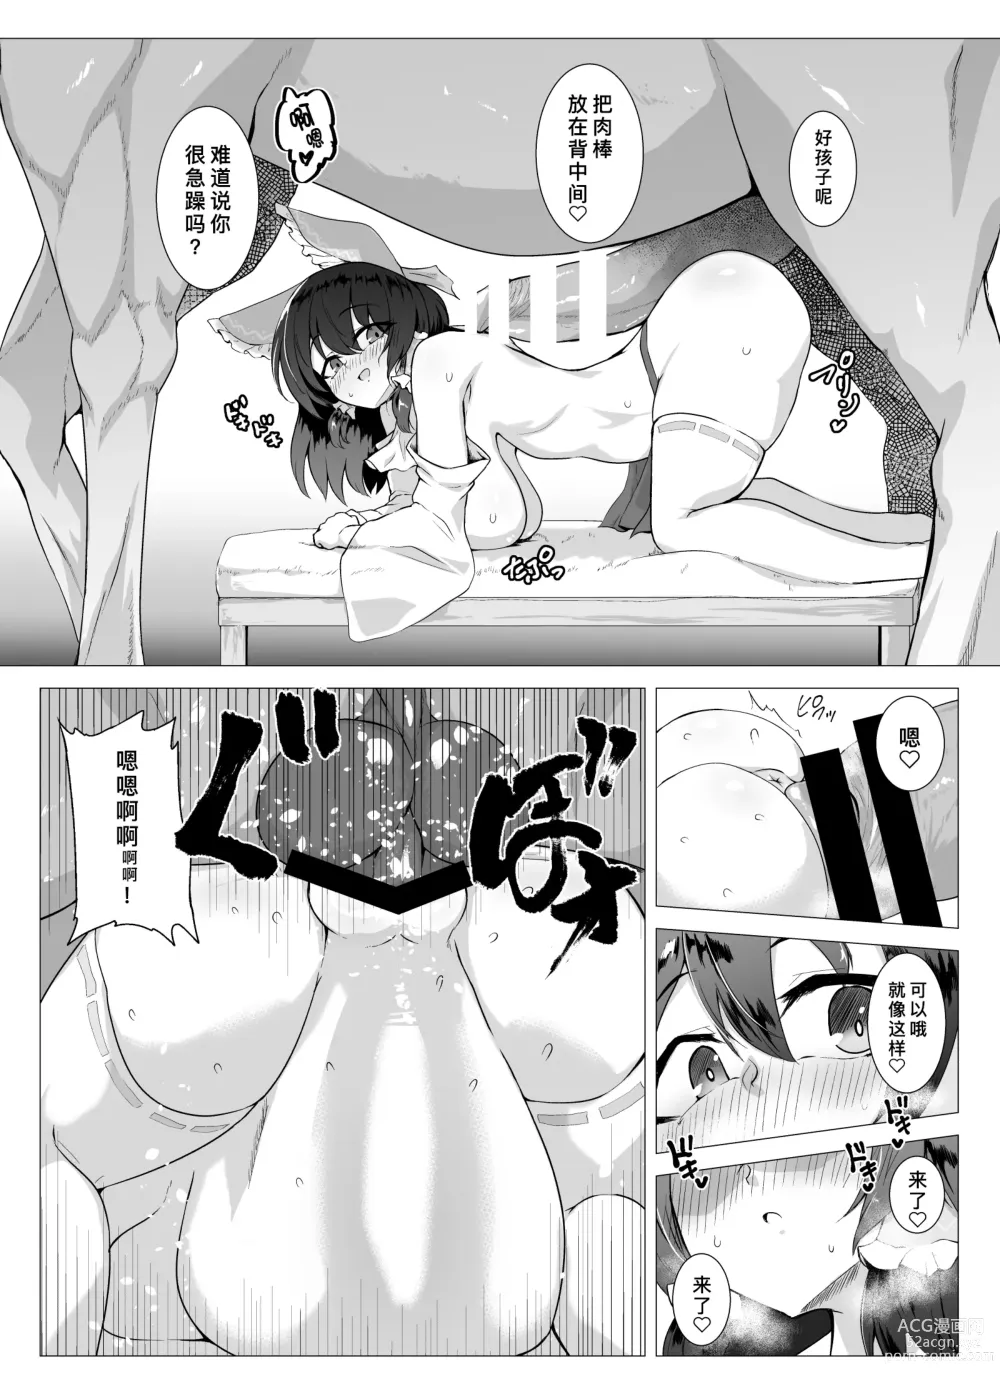 Page 10 of doujinshi 马巫女灵梦